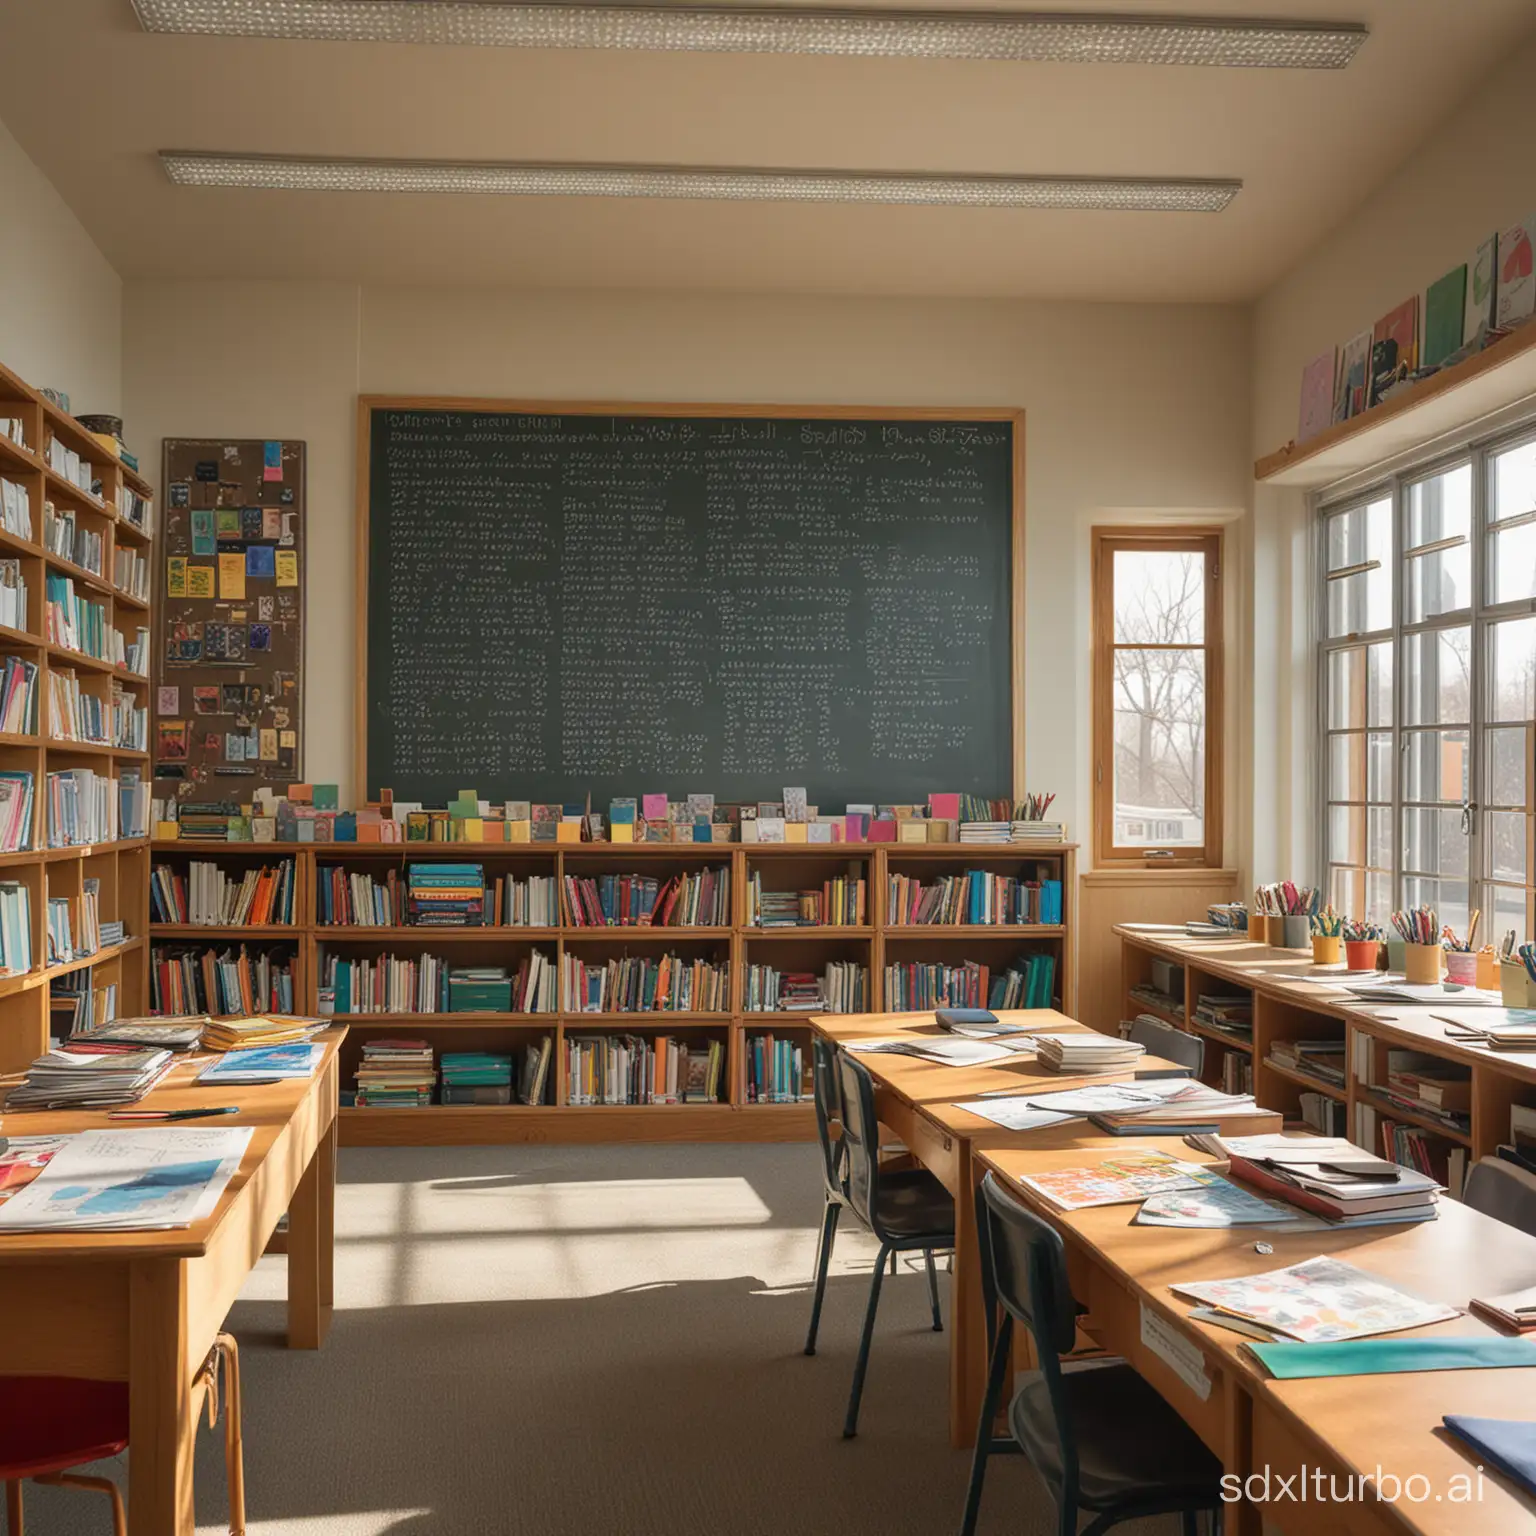 A classroom scene with a colorful chalkboard filled with drawings and equations, surrounded by shelves stacked with books, desks arranged neatly in rows, and sunlight streaming in through large windows.